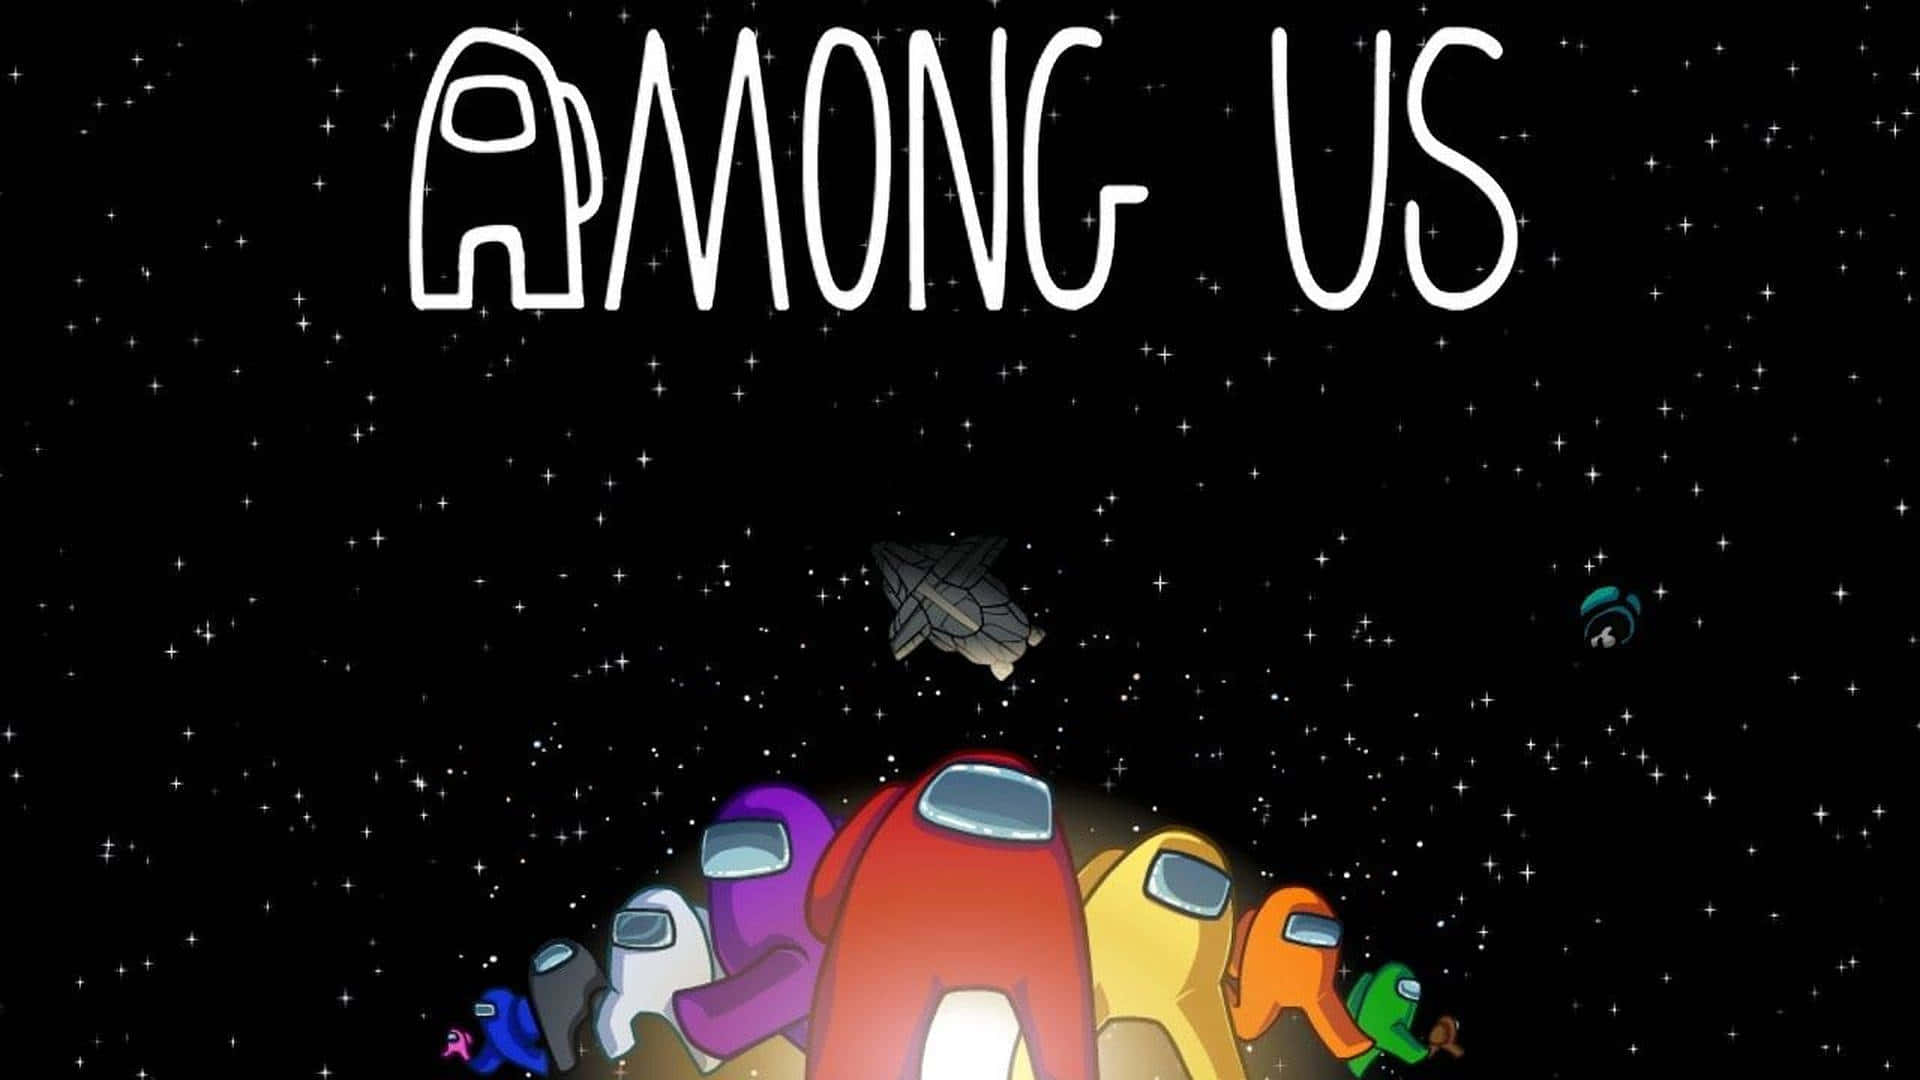 Join the Crew and Explore the Unknown of Space with Among Us!